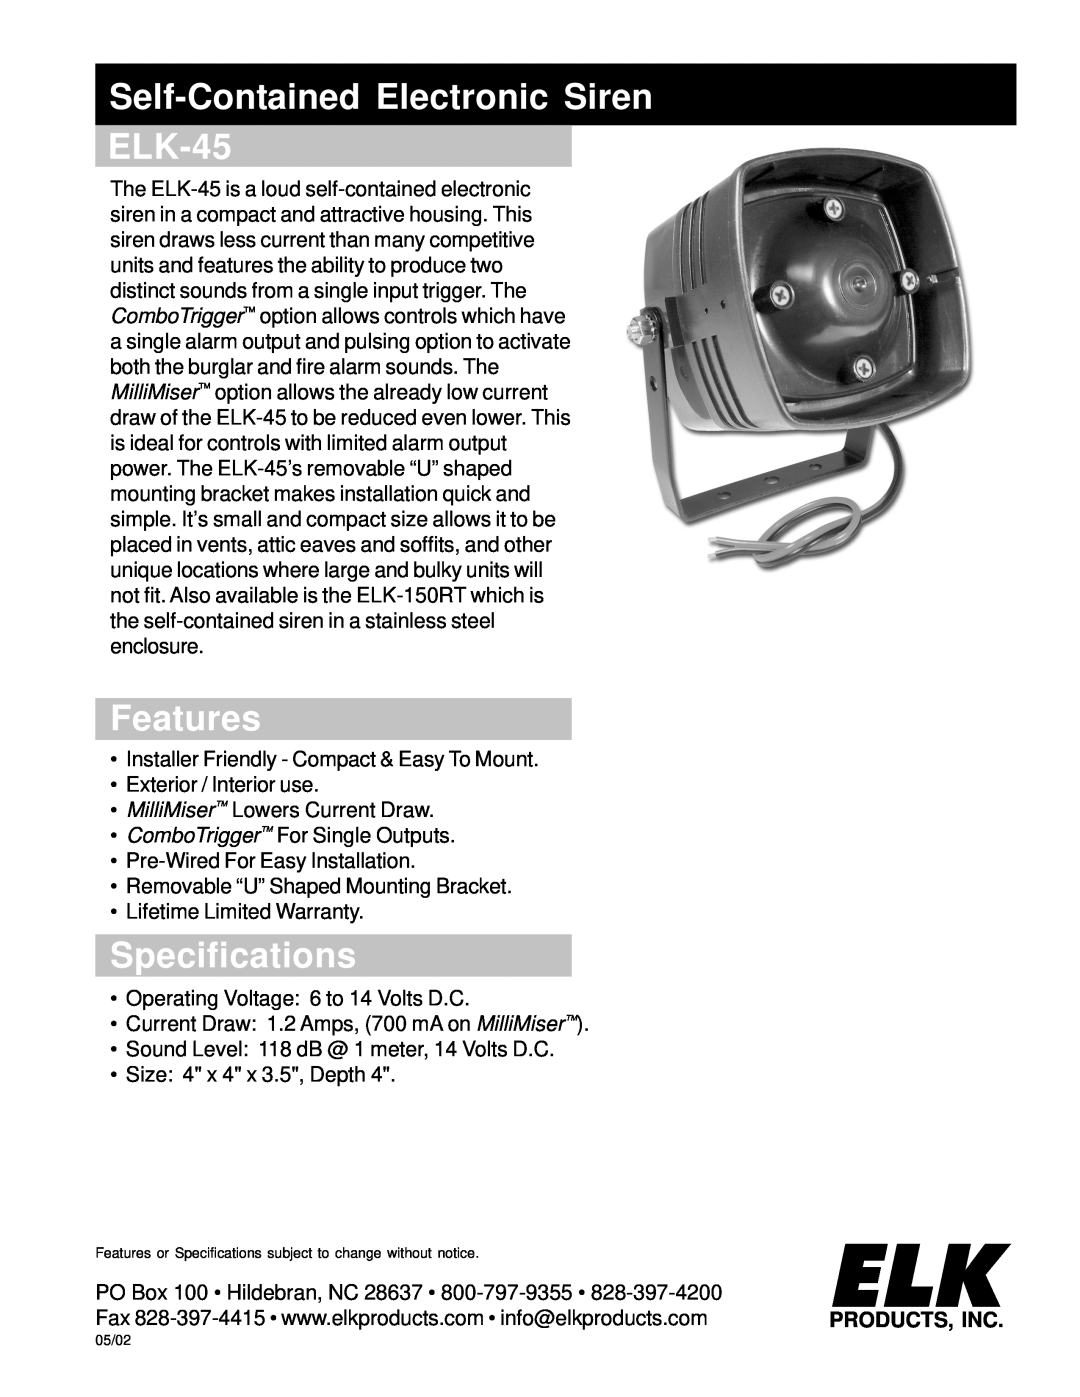 Elk specifications Self-ContainedElectronic Siren ELK-45, Features, Specifications, Products, Inc 